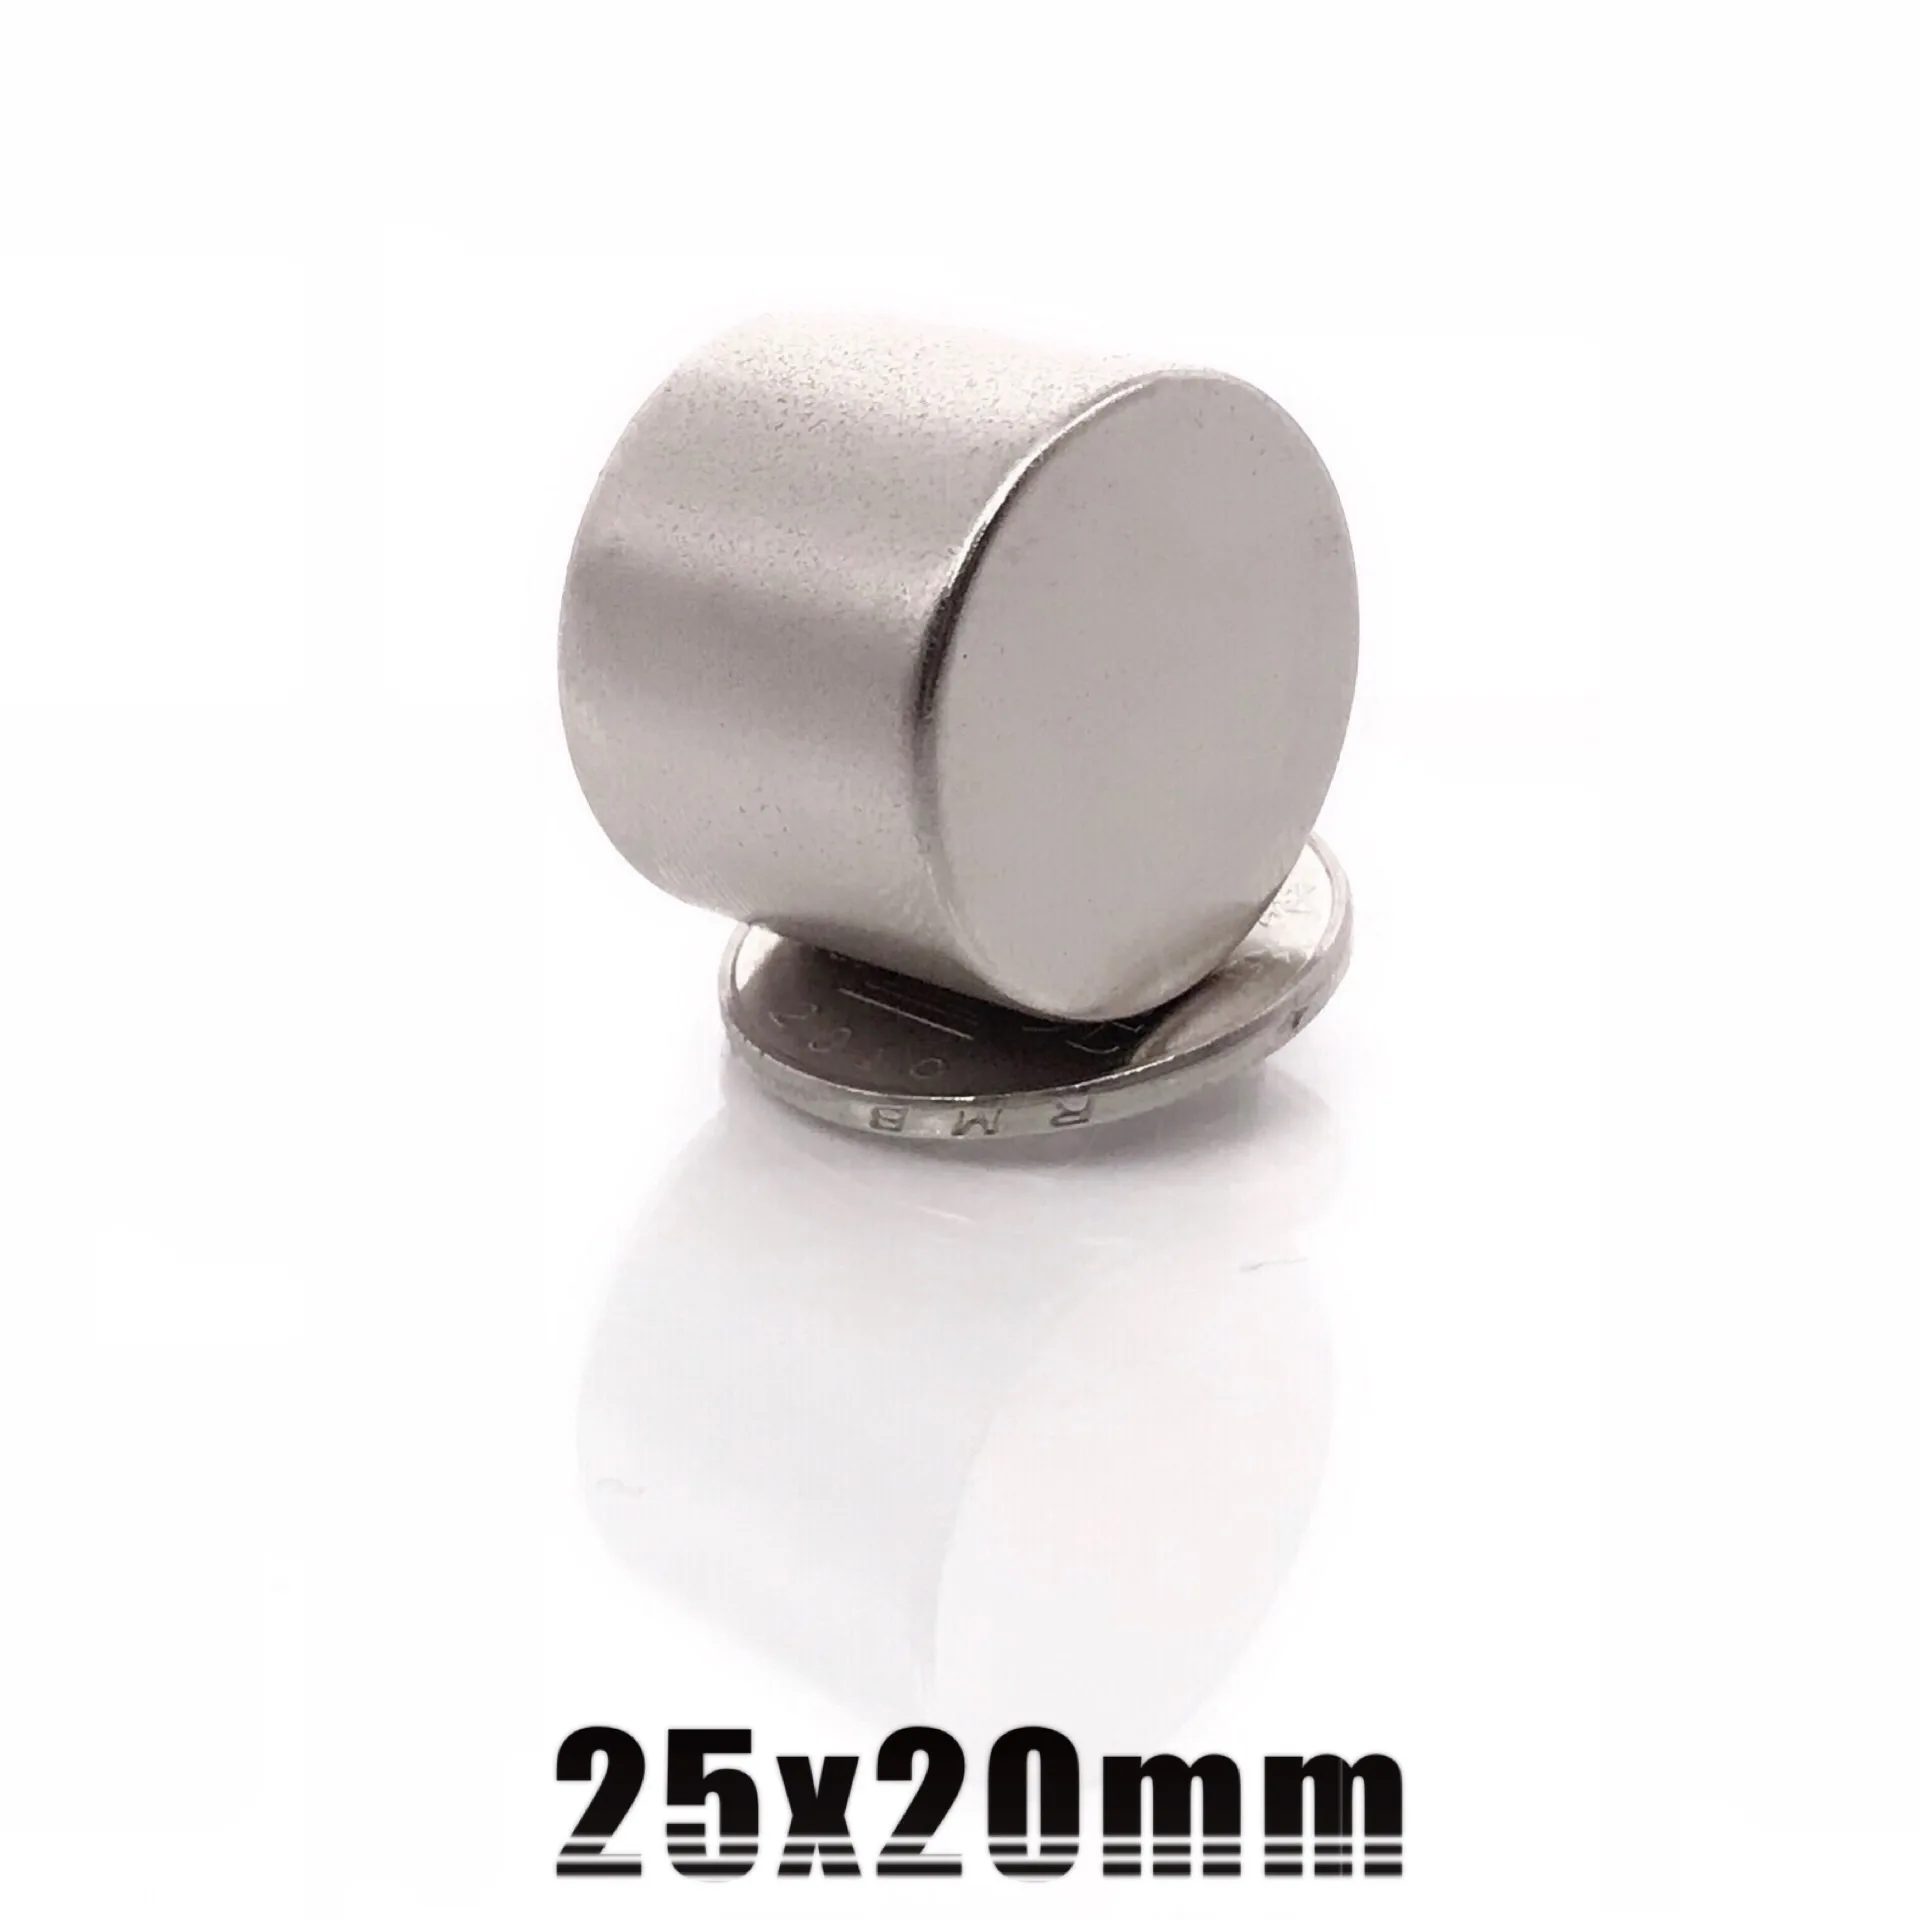 Wholesale 2x5mm N35 Super Strong Round Disc Cylinder Magnet Rare Earth Neodymium